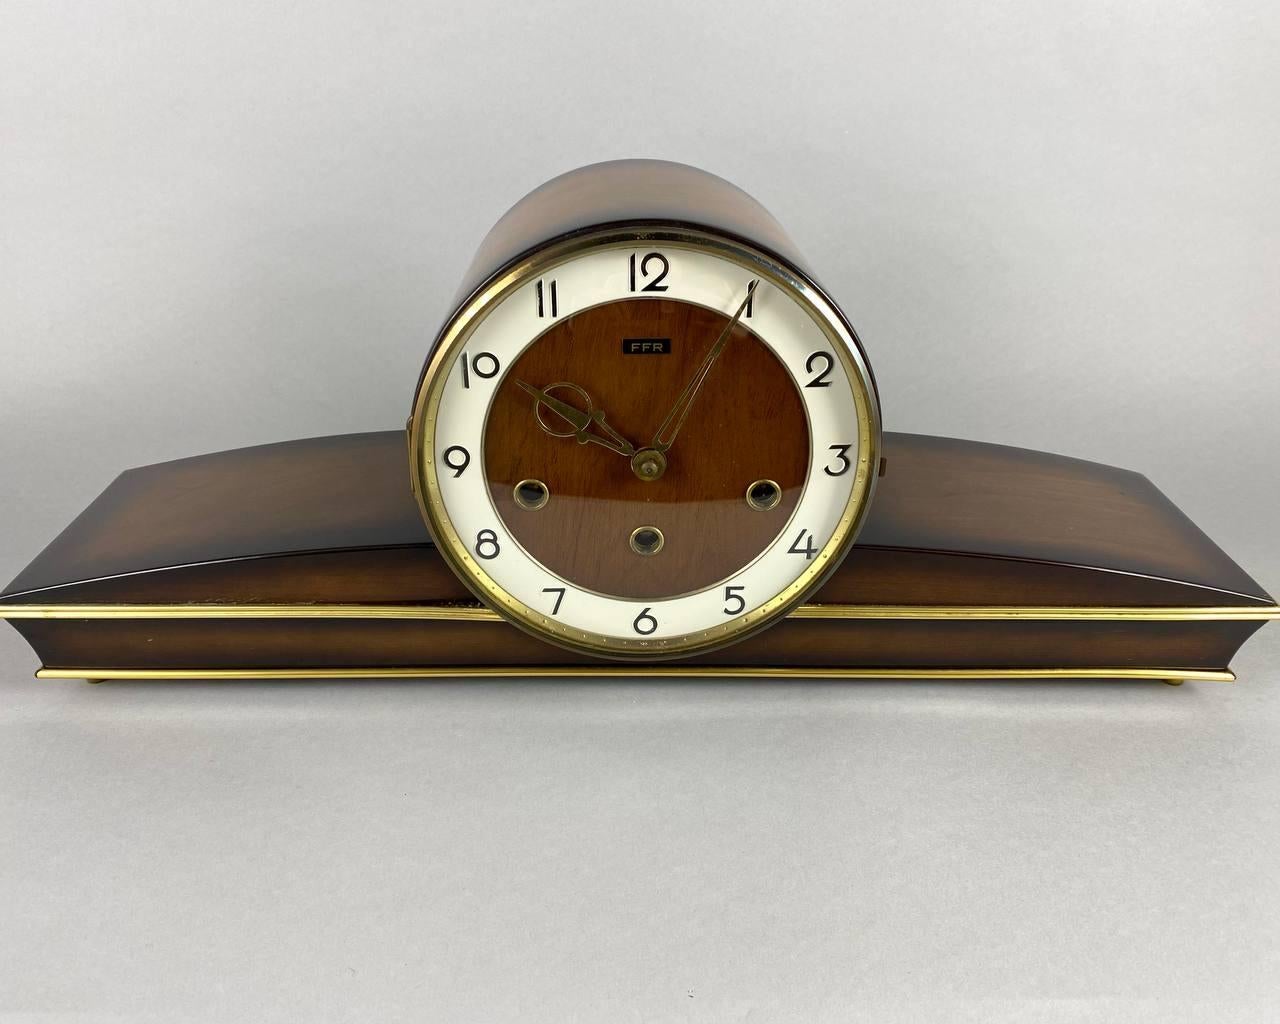 FFR Carillon Romanet Morbier (made in France) table clock made in the American style of the 50s with minimal decoration and elegant smooth silhouette lines - in a wooden case.

 For the manufacture of the case of the table clock, an array of